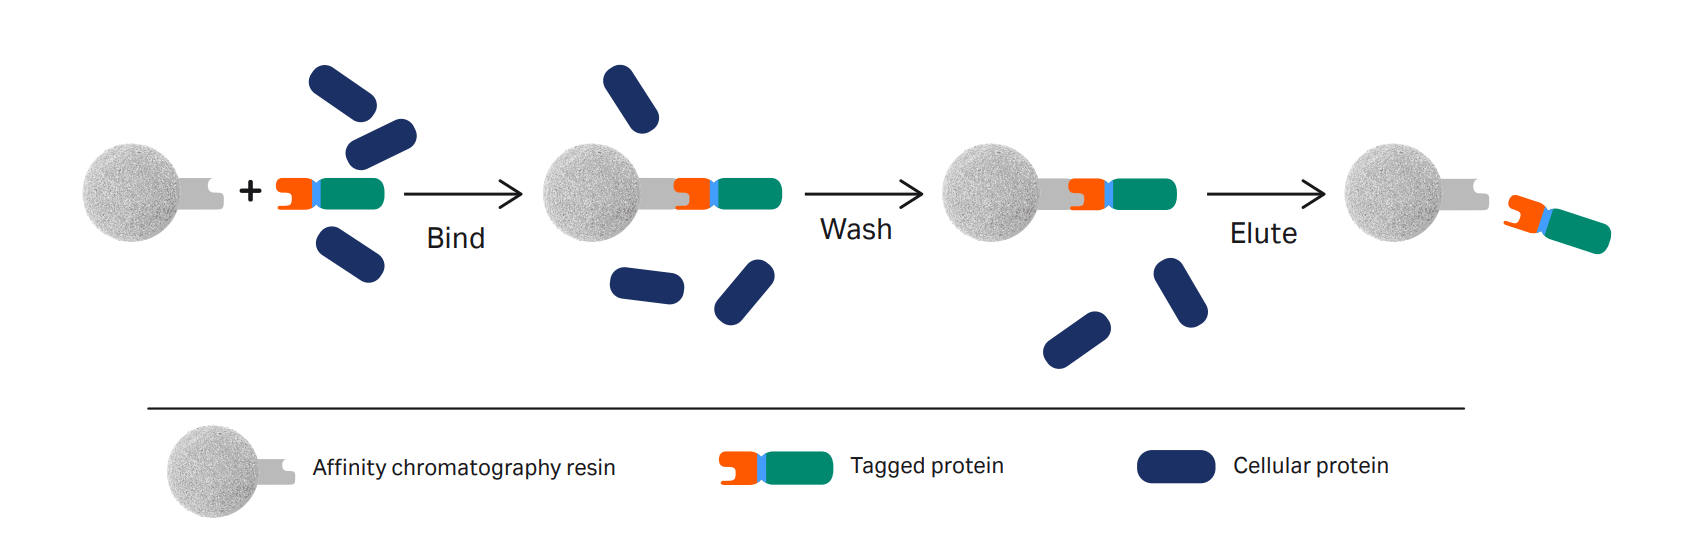 Tagged_protein_purification_landscape